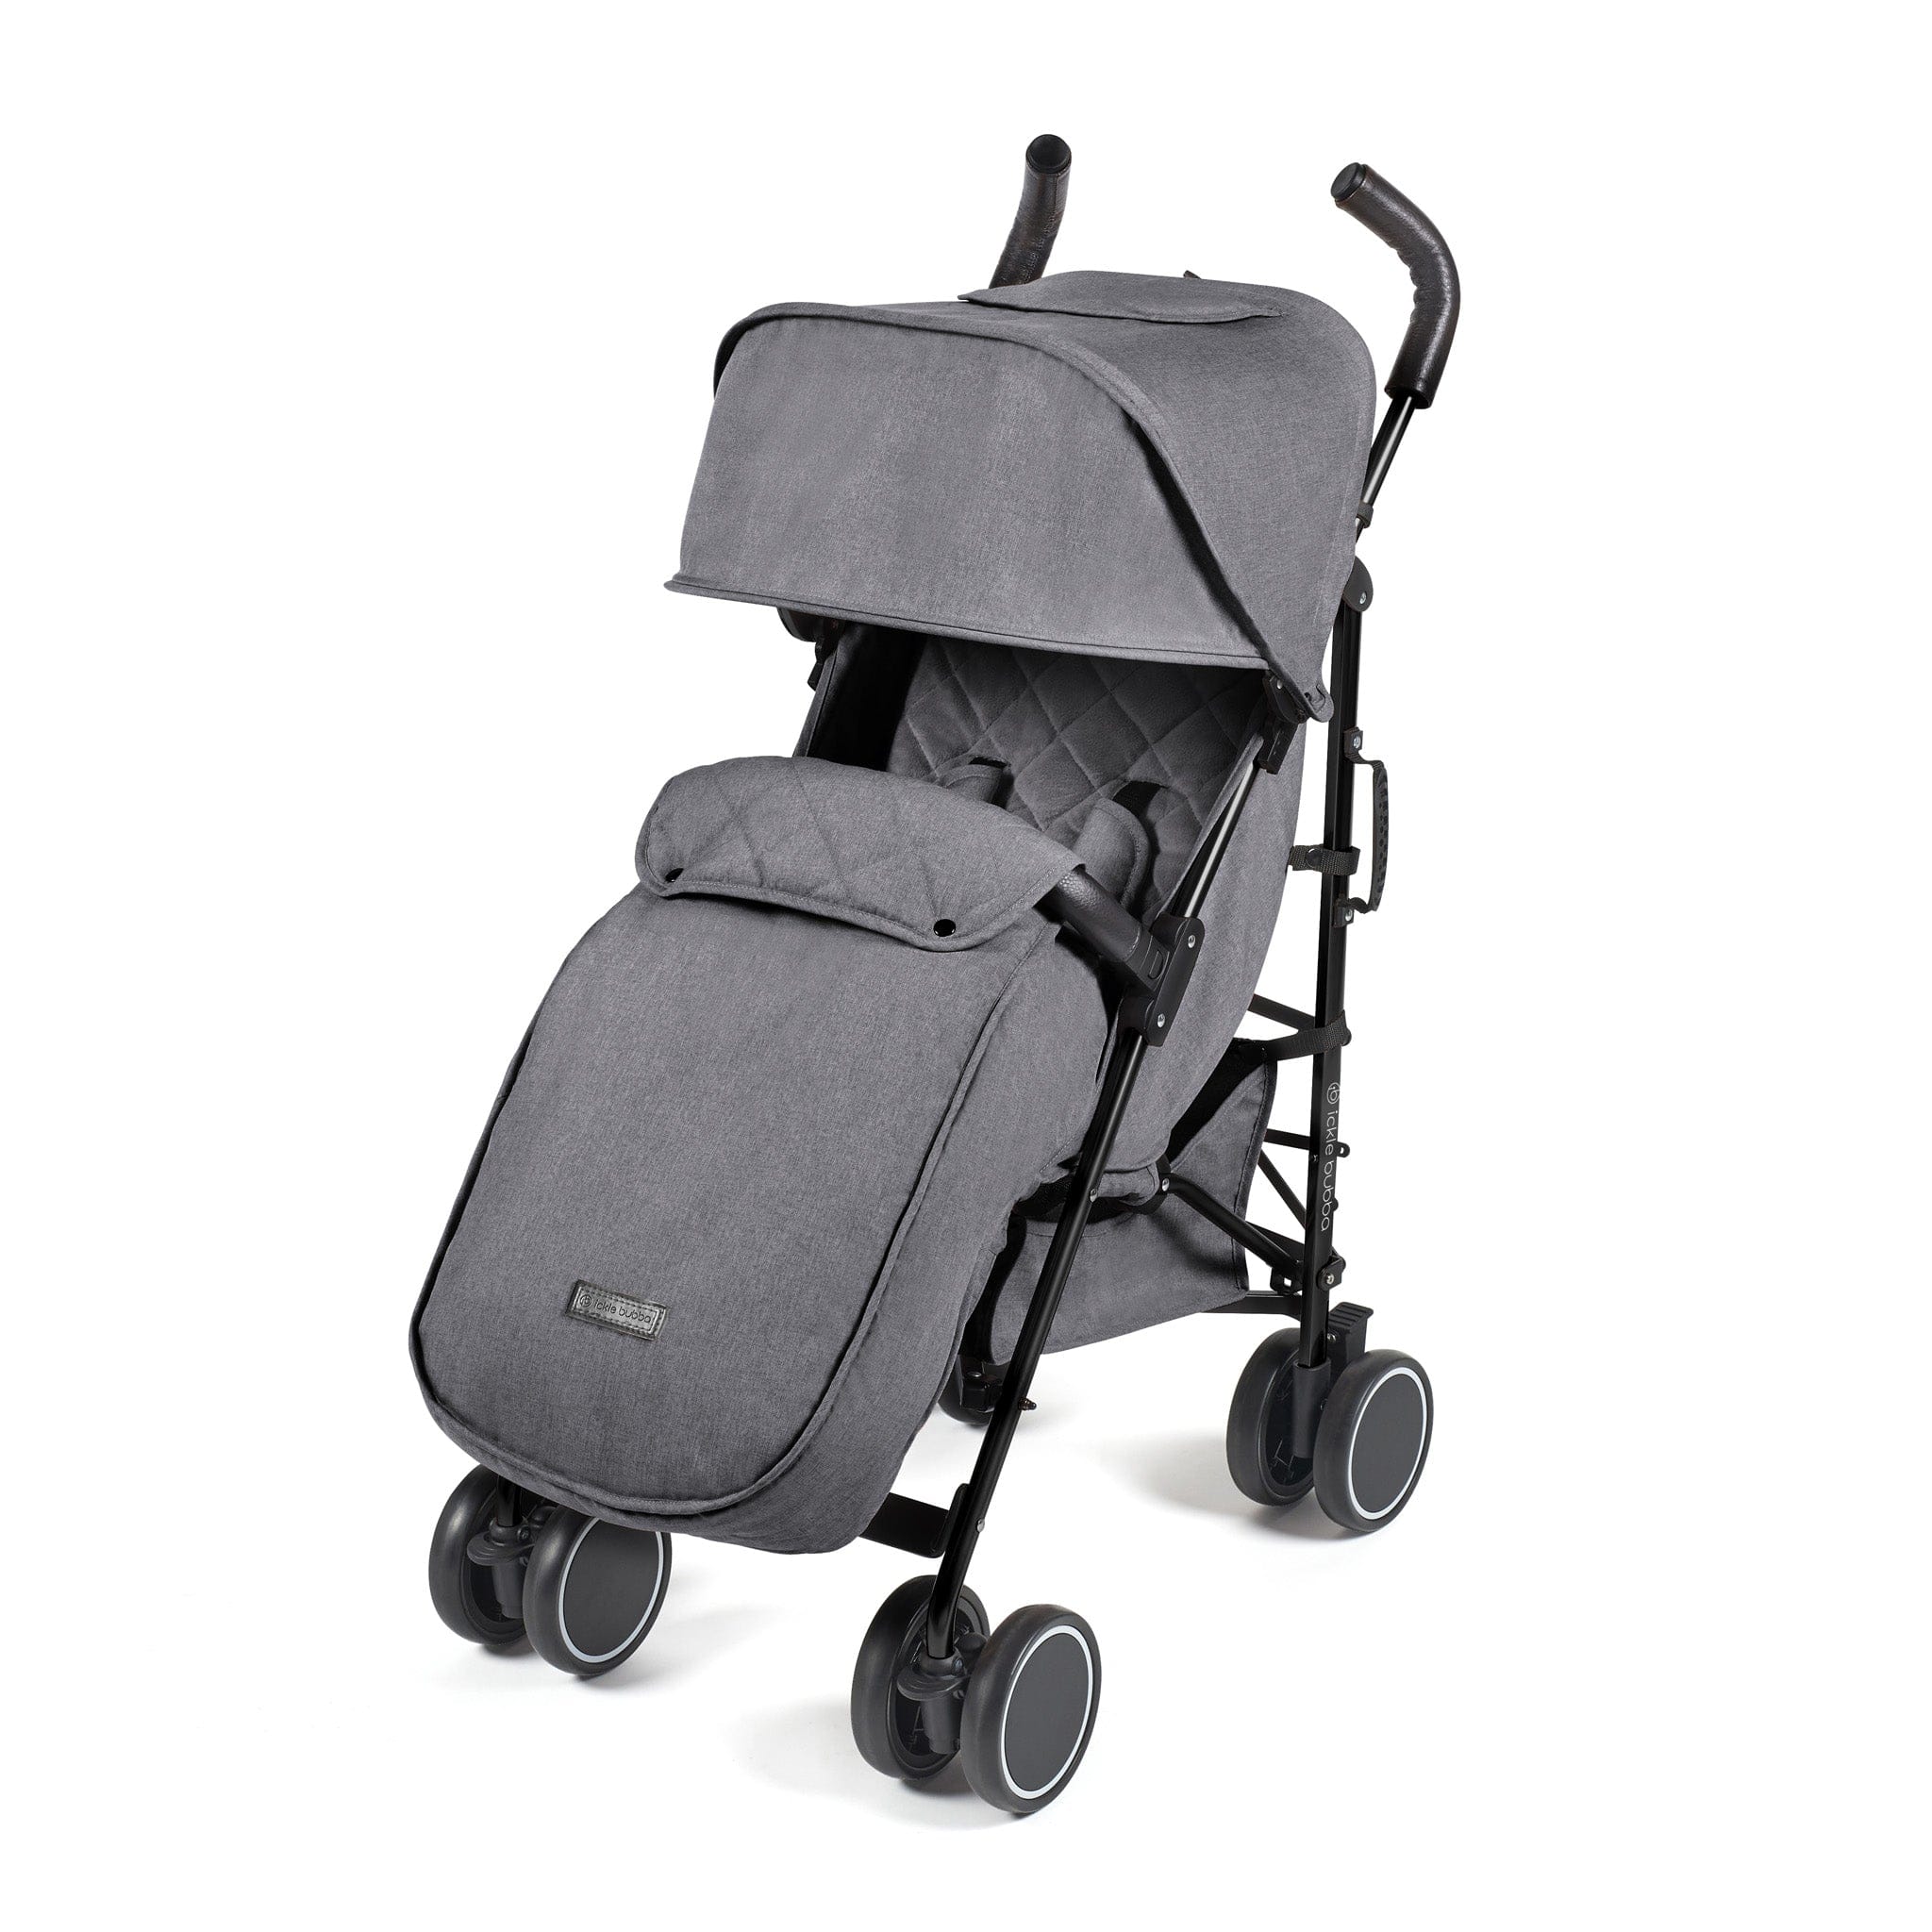 Ickle Bubba baby pushchairs Ickle Bubba Discovery Prime Pushchair Graphite Grey/Matt Black 15-002-300-120